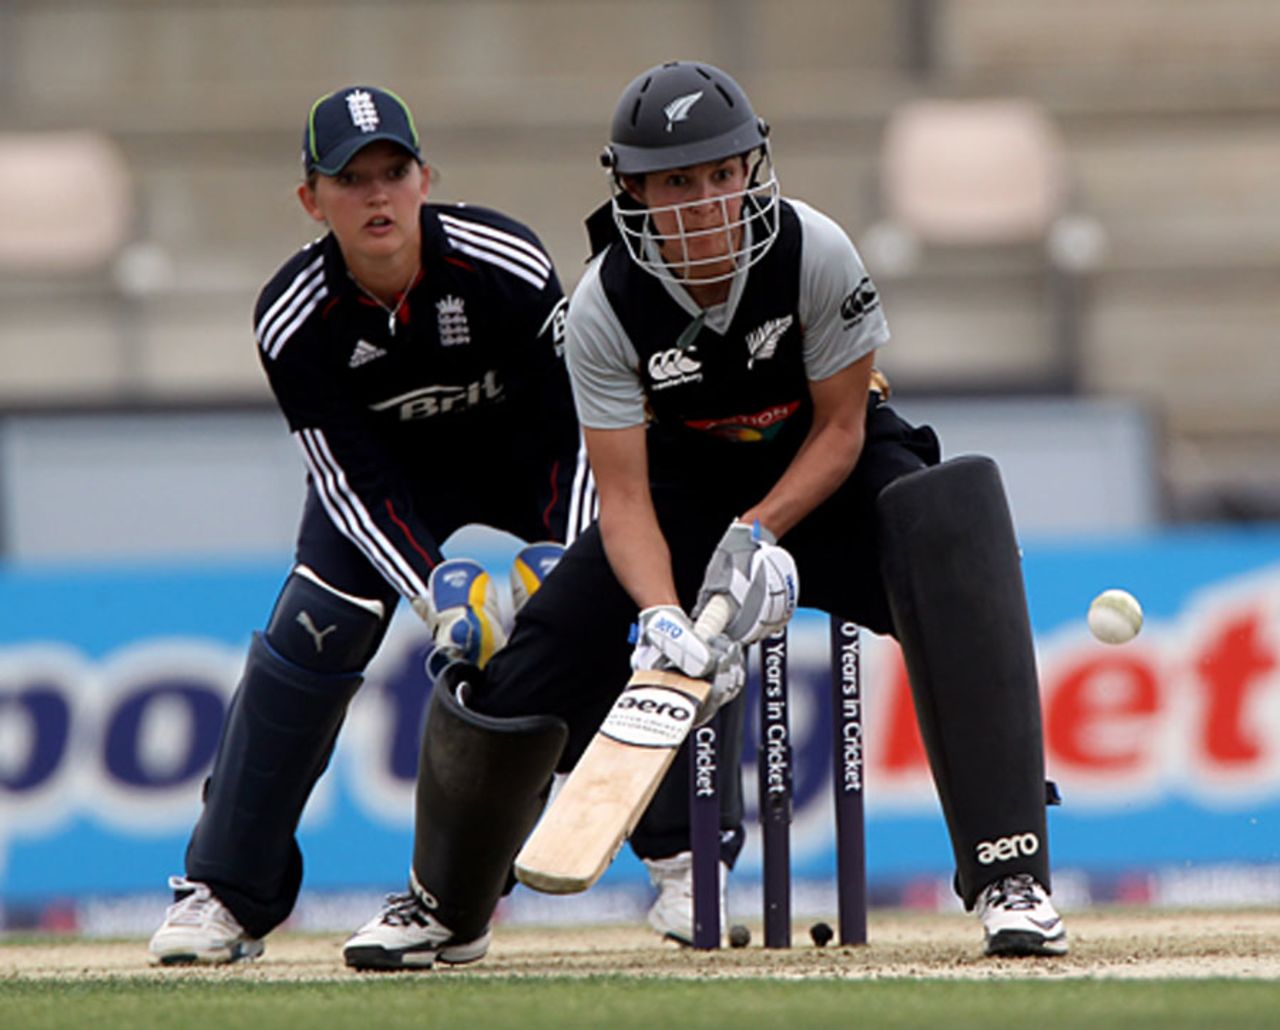 Sara McGlashan blended power with invention on her way to a 41-ball 47, England Women v New Zealand Women, 2nd T20I, Rose Bowl, July 1, 2010